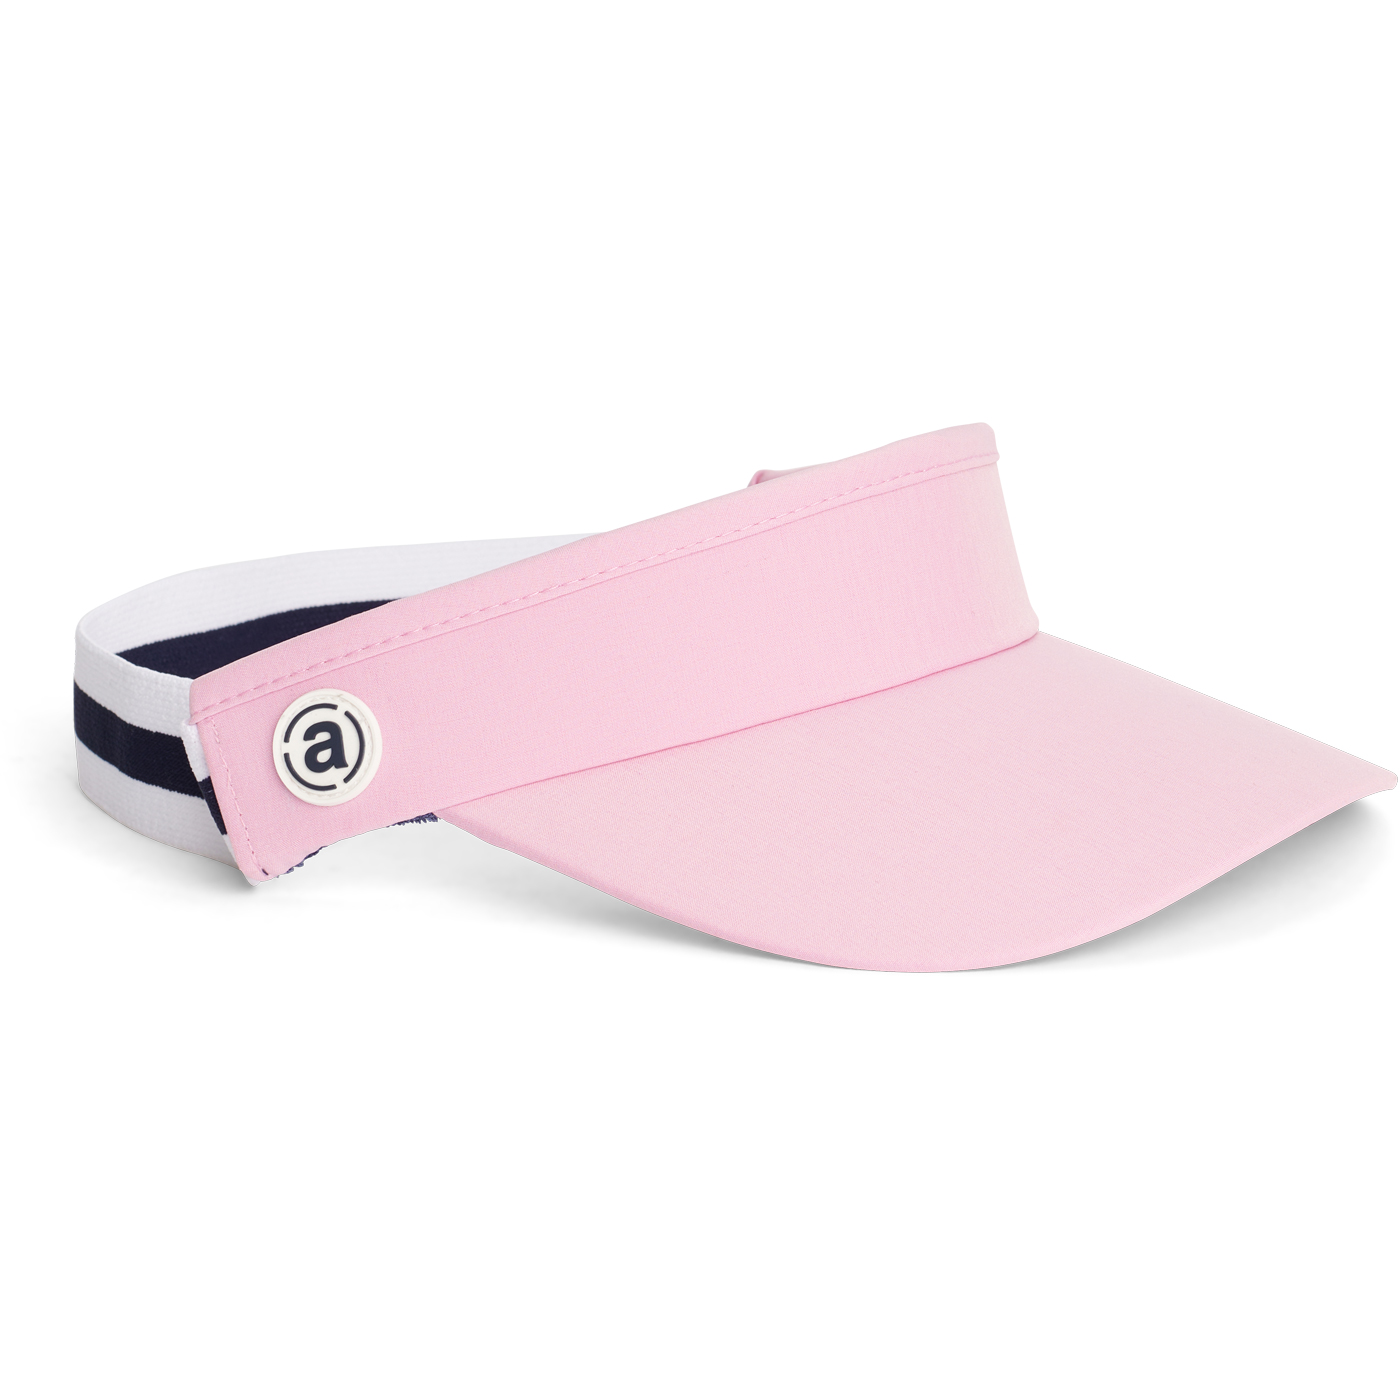 Kildare Stripe visor - peony in the group WOMEN / All clothing at Abacus Sportswear (7376390)